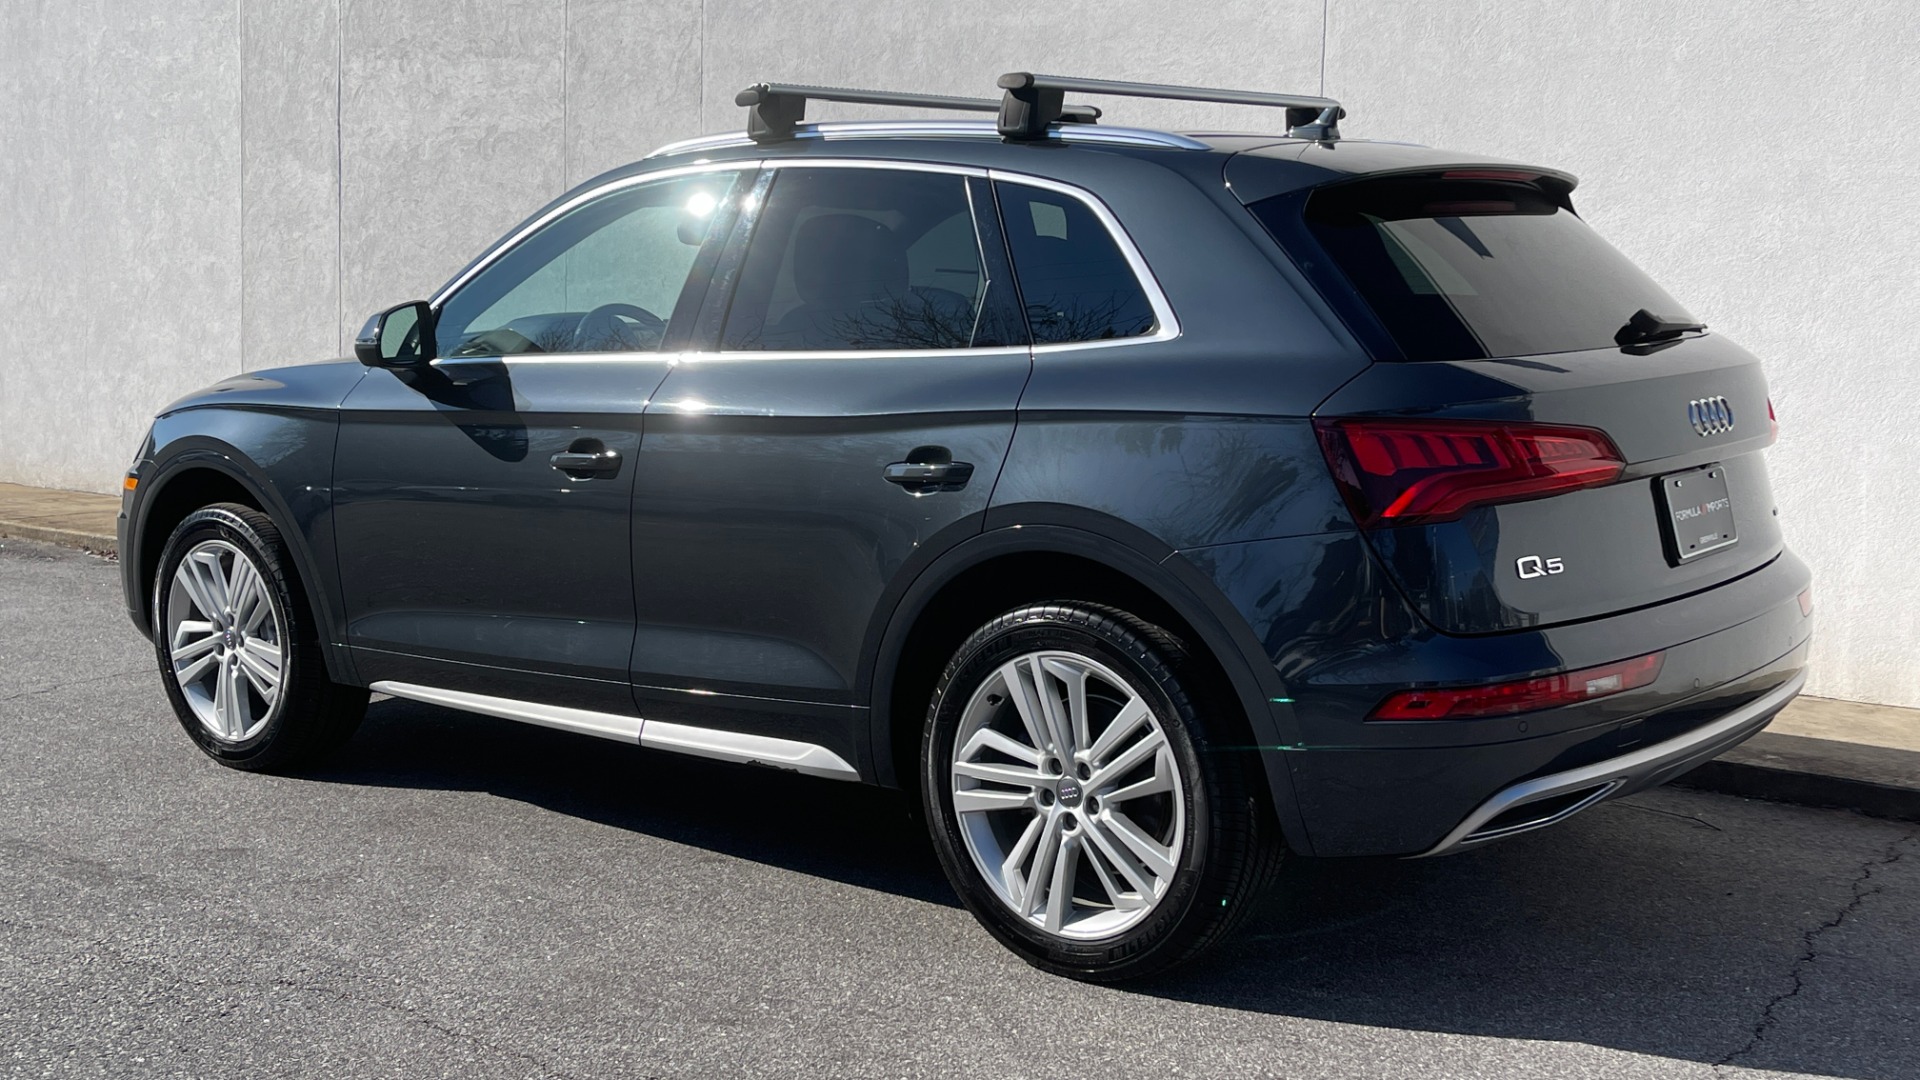 Used 2019 Audi Q5 PREMIUM PLUS / NAV / SUNROOF / WARM WTHR / PARK SYS PLUS / REARVIEW for sale $40,495 at Formula Imports in Charlotte NC 28227 4